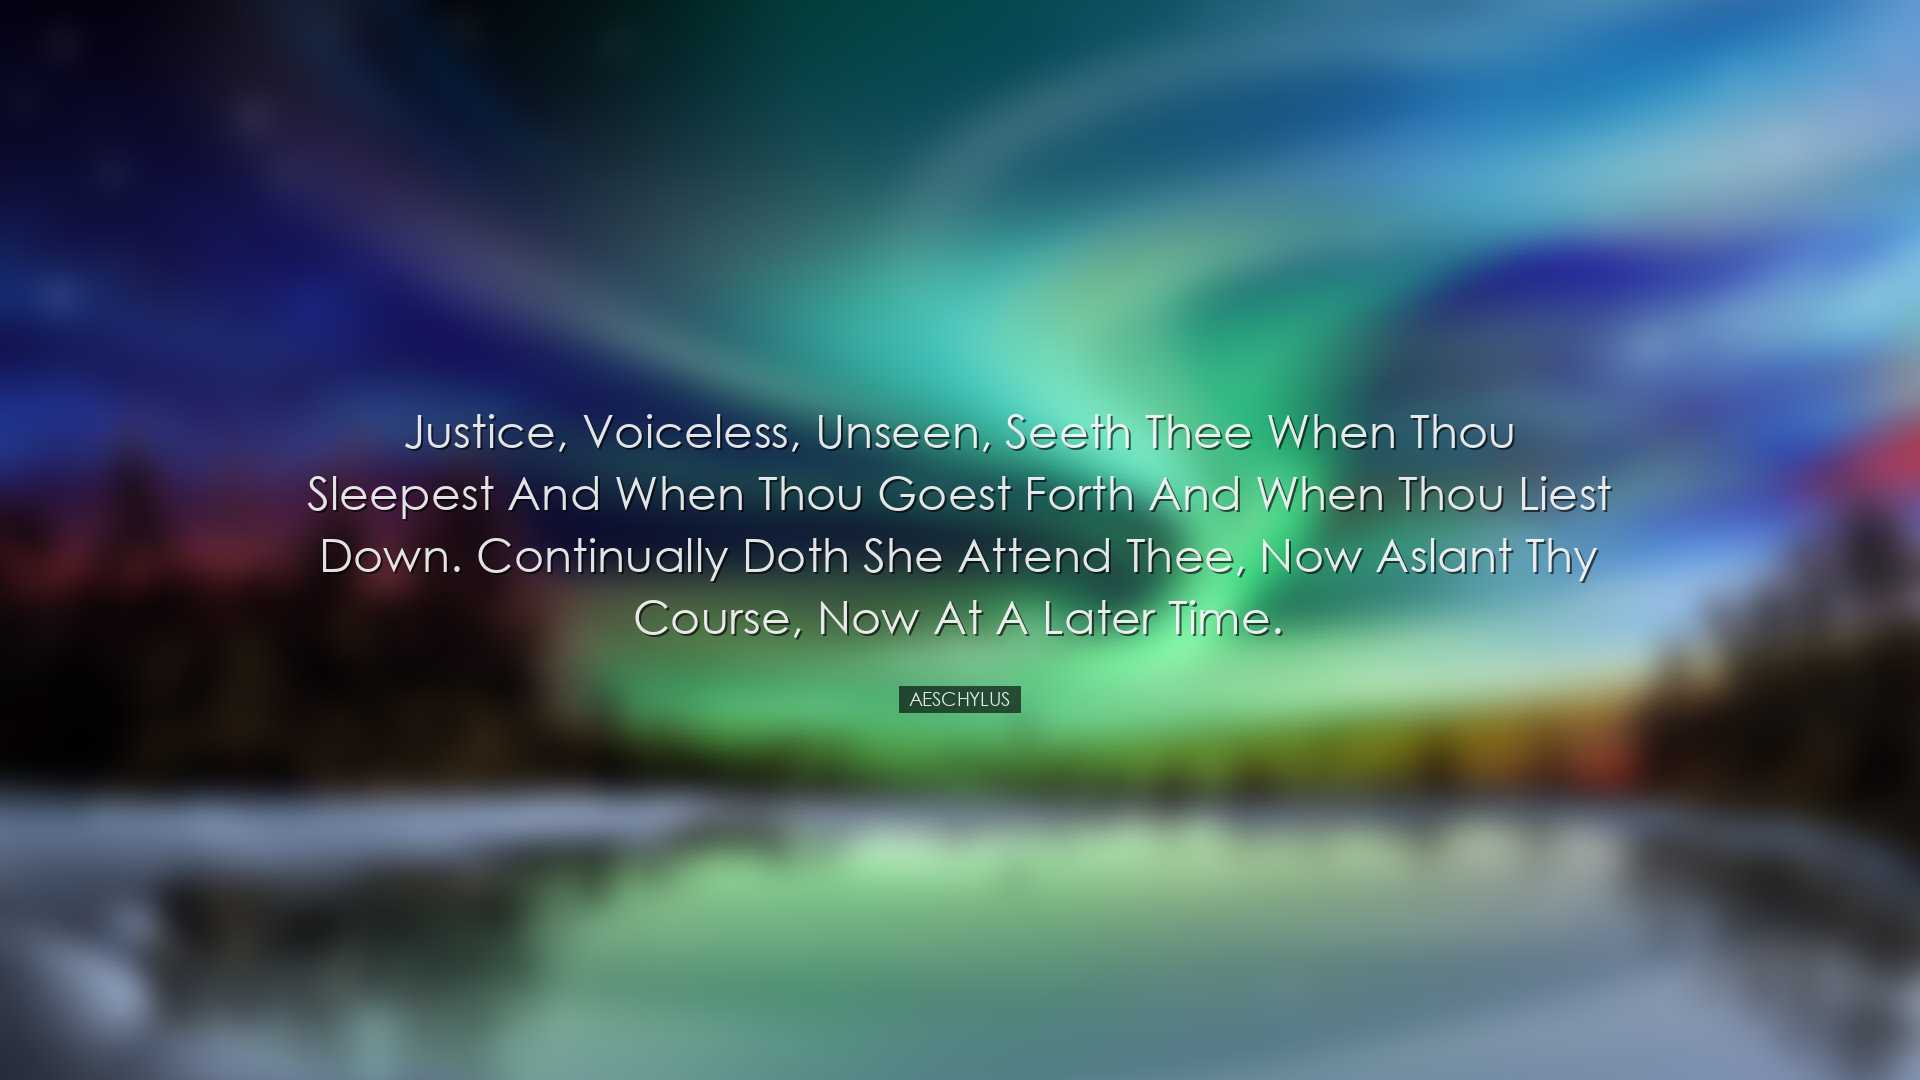 Justice, voiceless, unseen, seeth thee when thou sleepest and when